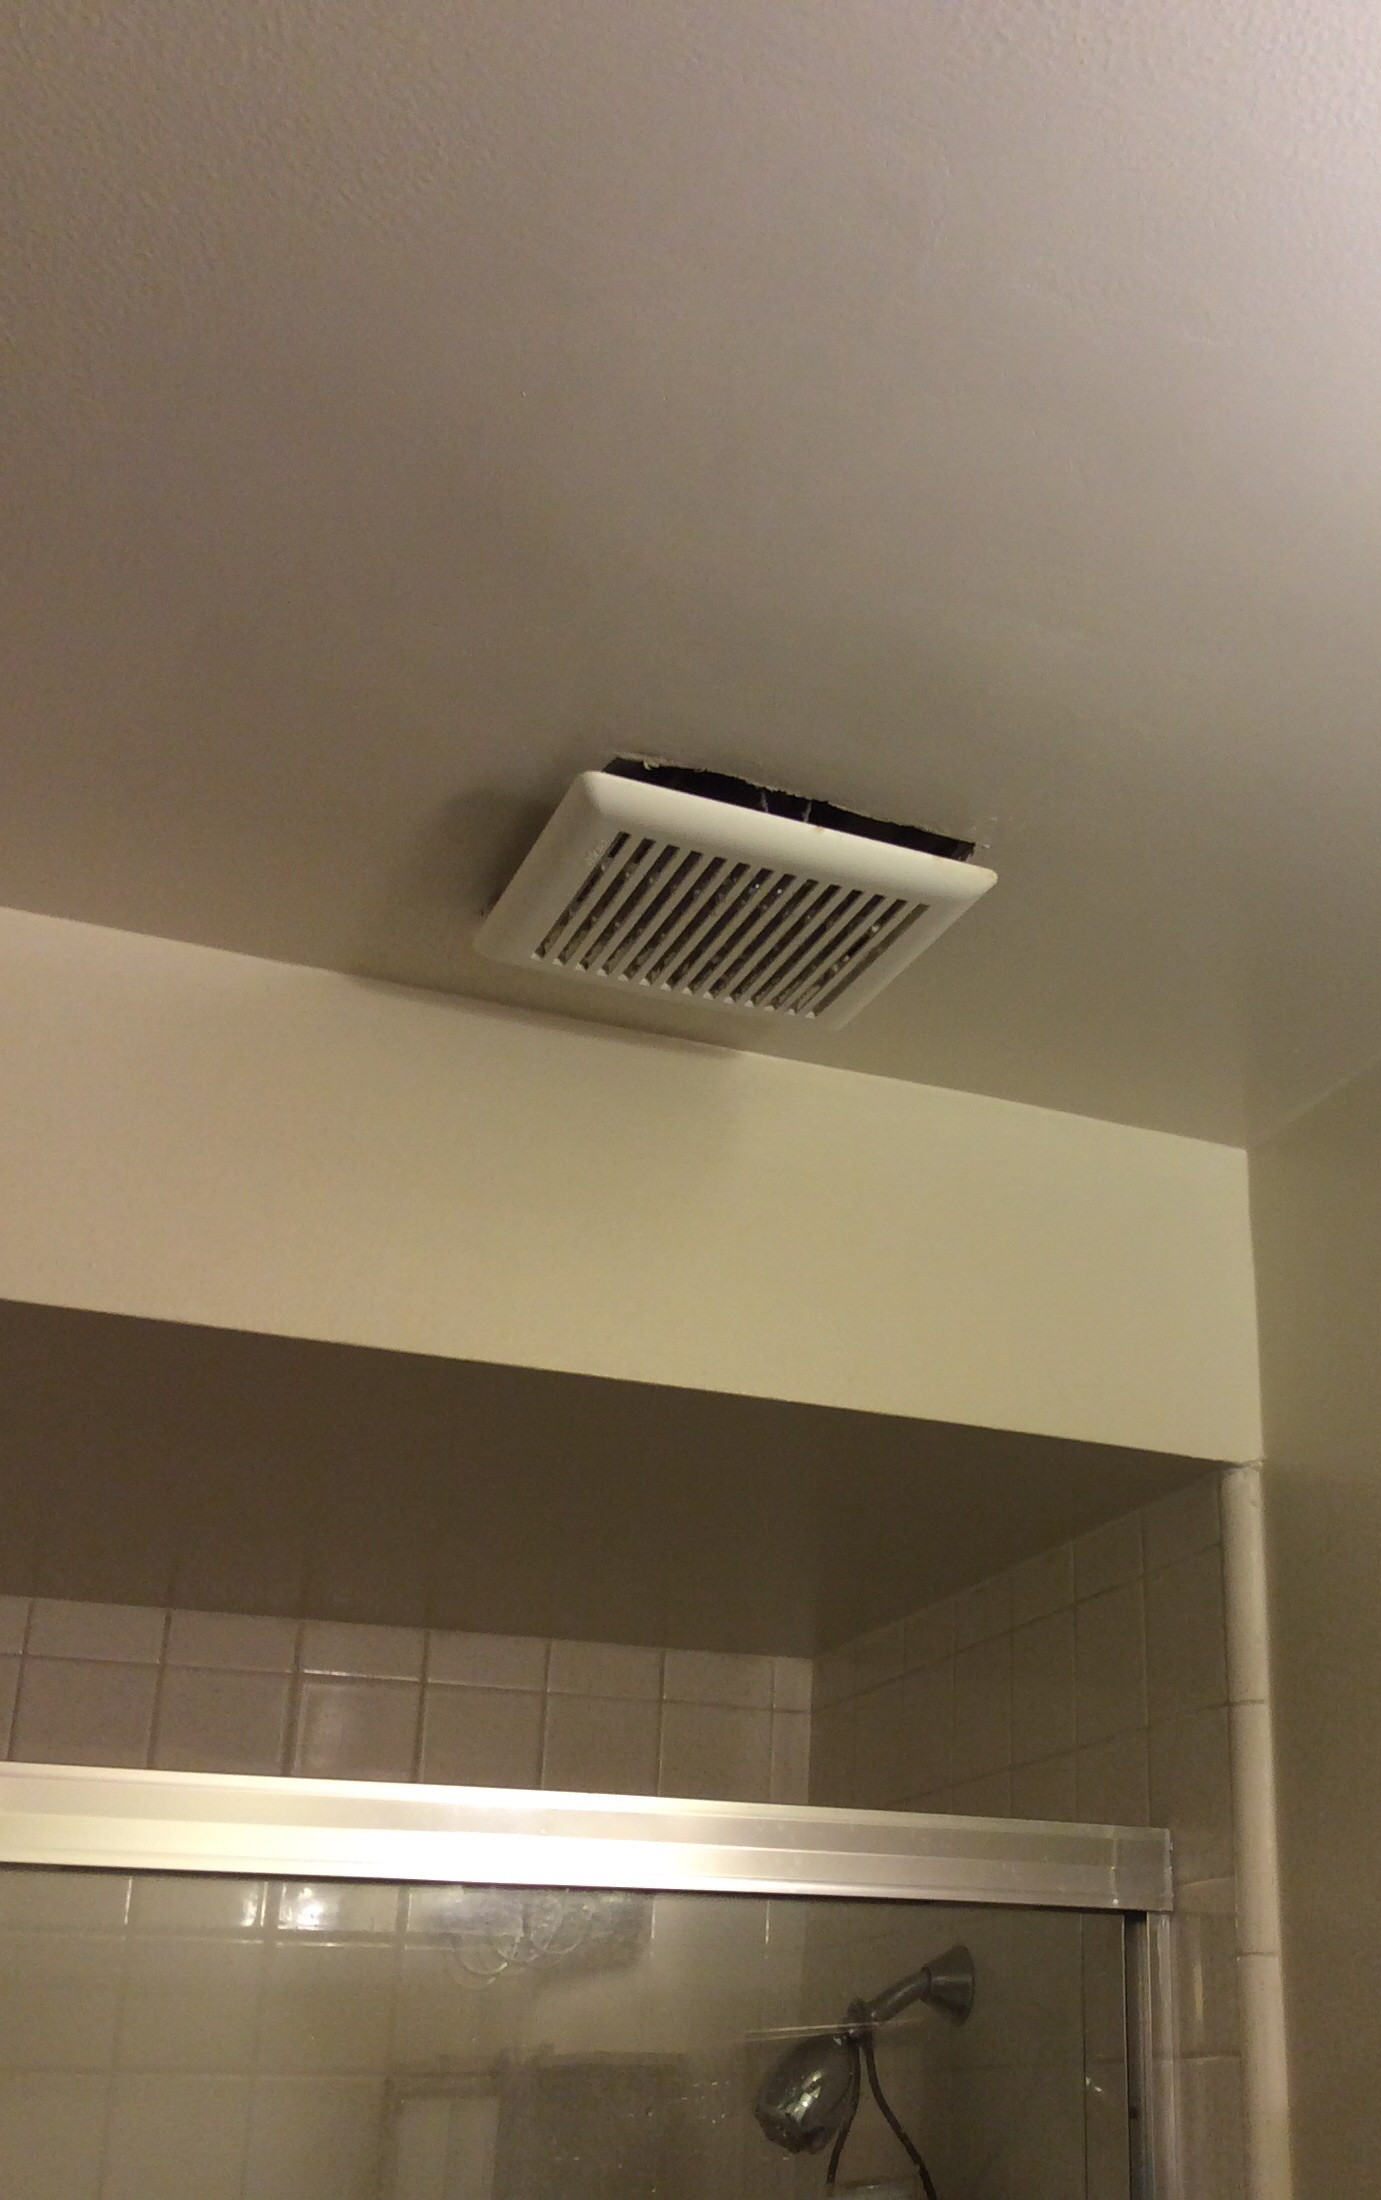 Bathroom Ceiling Exhaust Fans
 bathroom Is it normal for an exhaust fan cover to hang